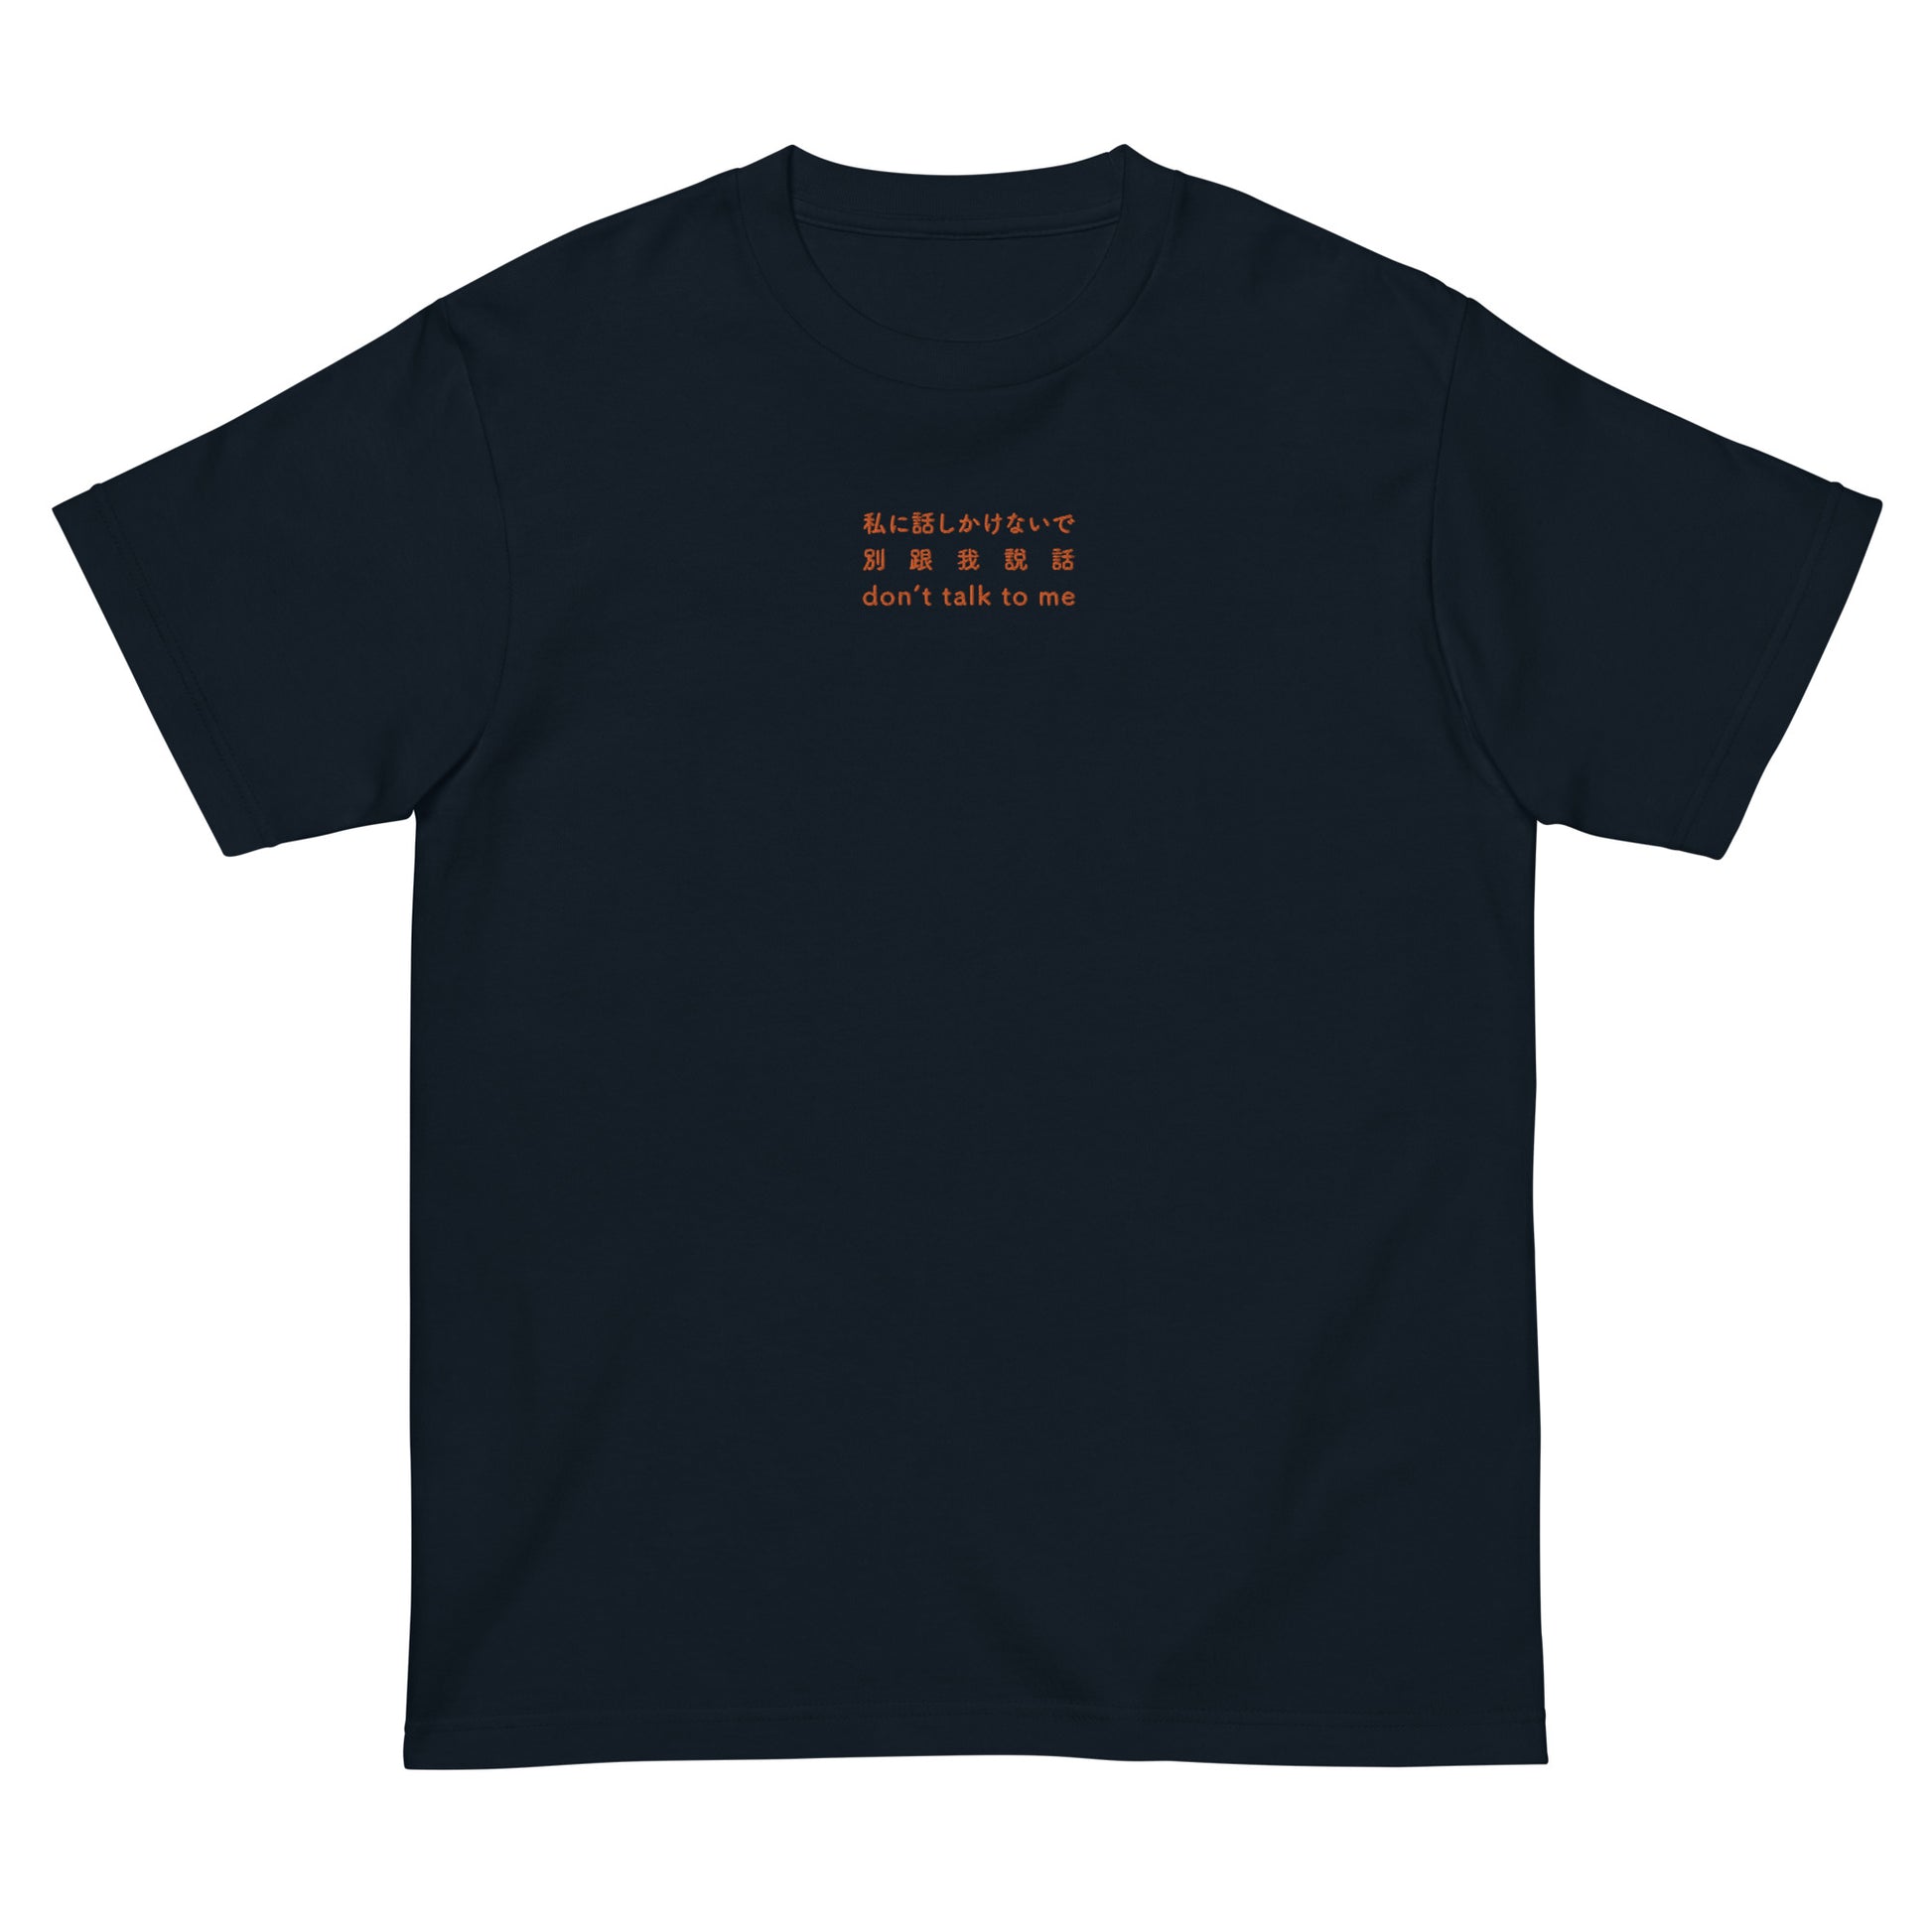 Navy High Quality Tee - Front Design with an Orange Embroidery "don't talk to me" in Japanese,Chinese and English